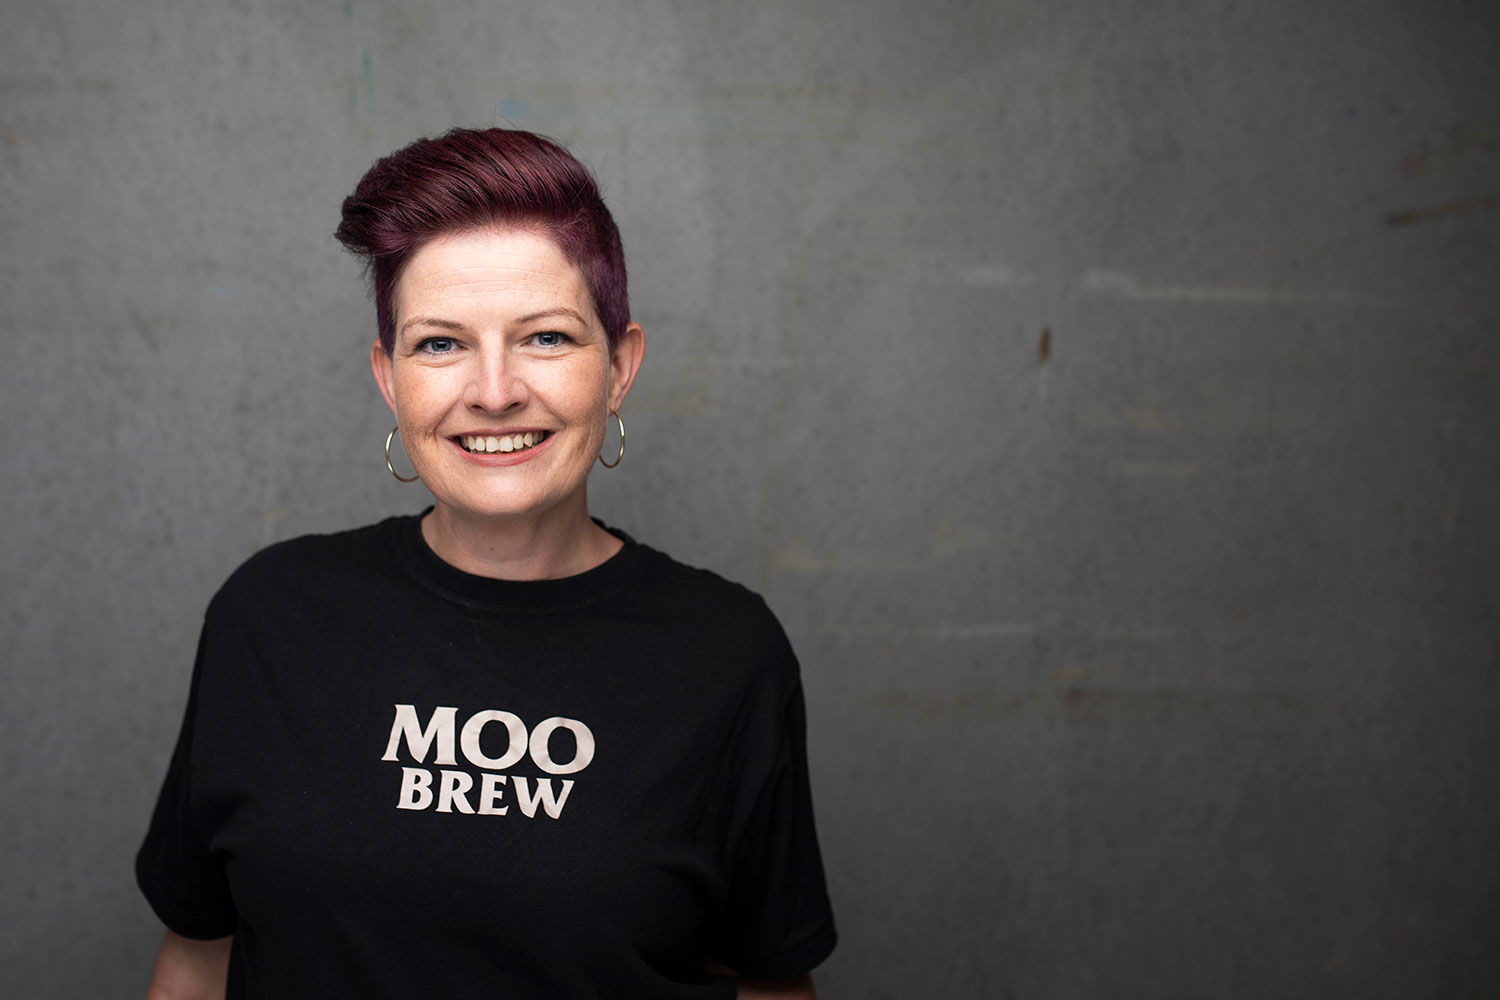 Lauren Sheppard, General Manager of Moo Brew